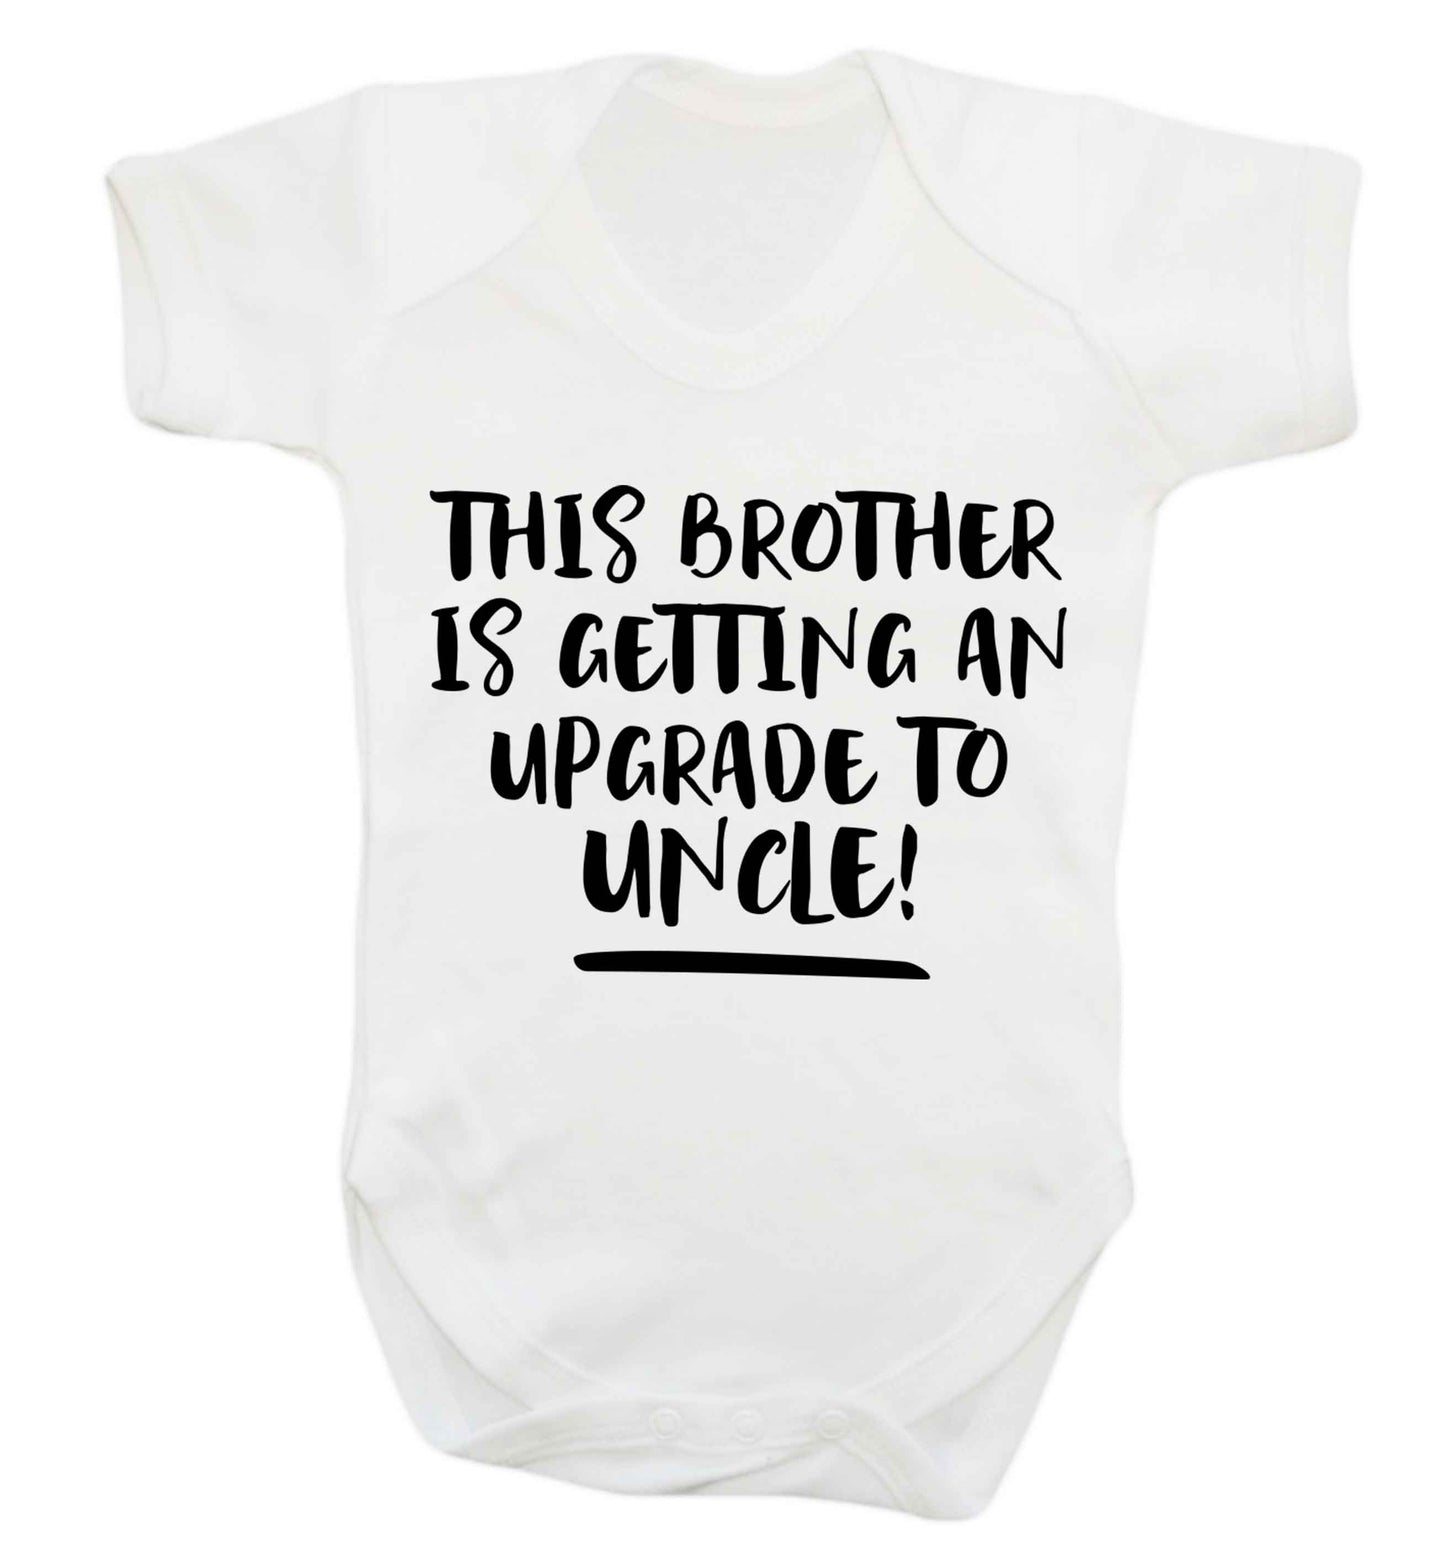 This brother is getting an upgrade to uncle! Baby Vest white 18-24 months